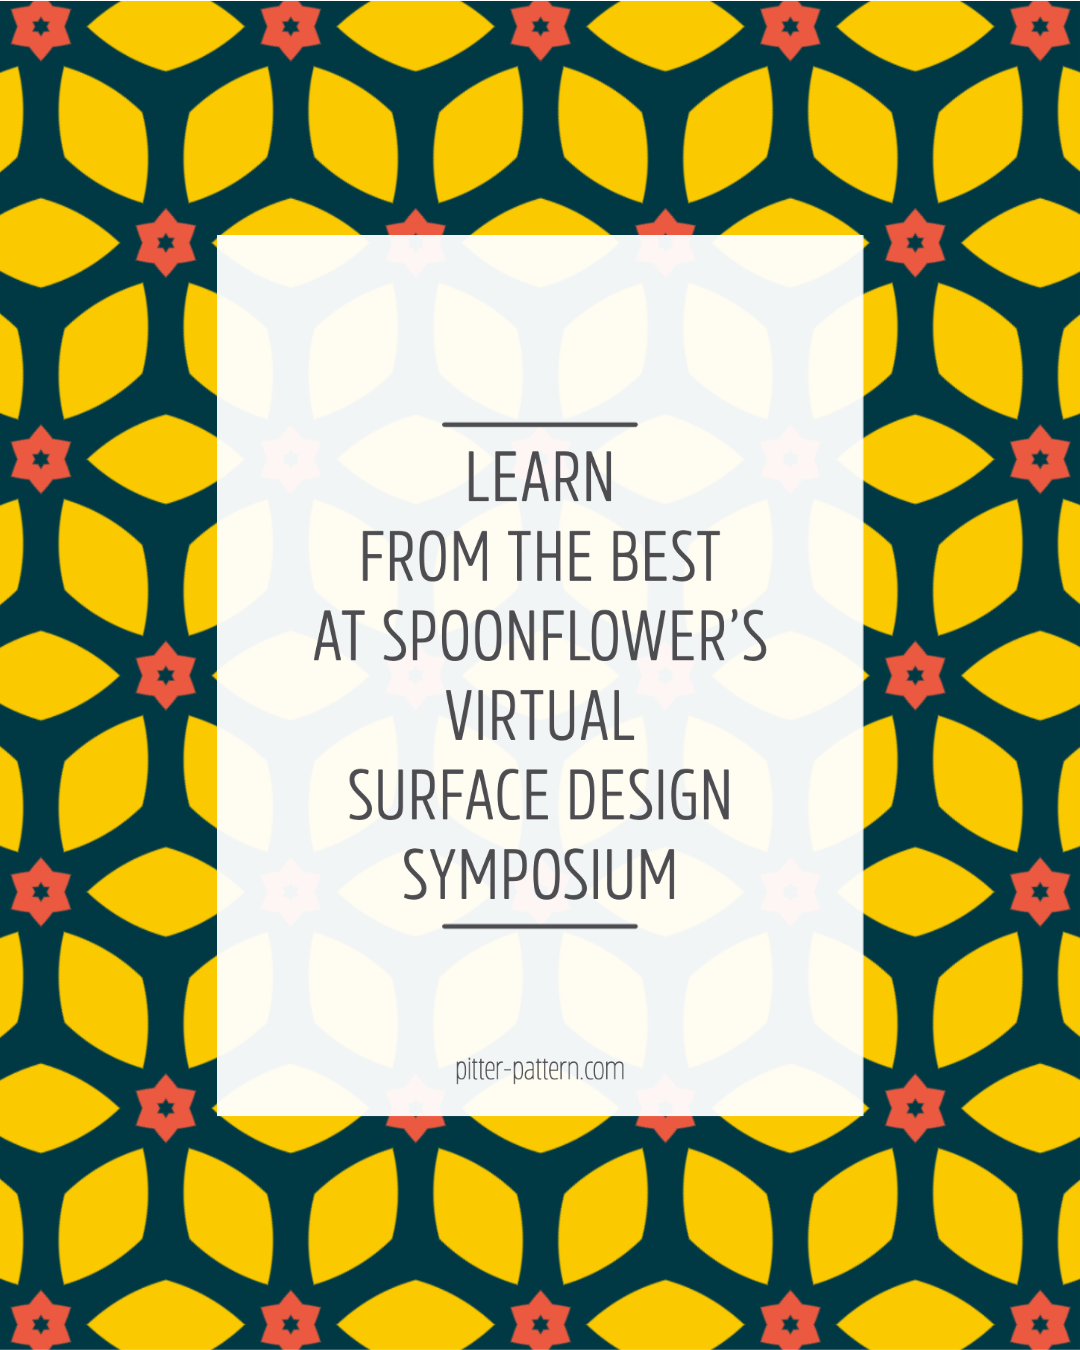 Learn from the best at Spoonflower's virtual Surface Design Symposium